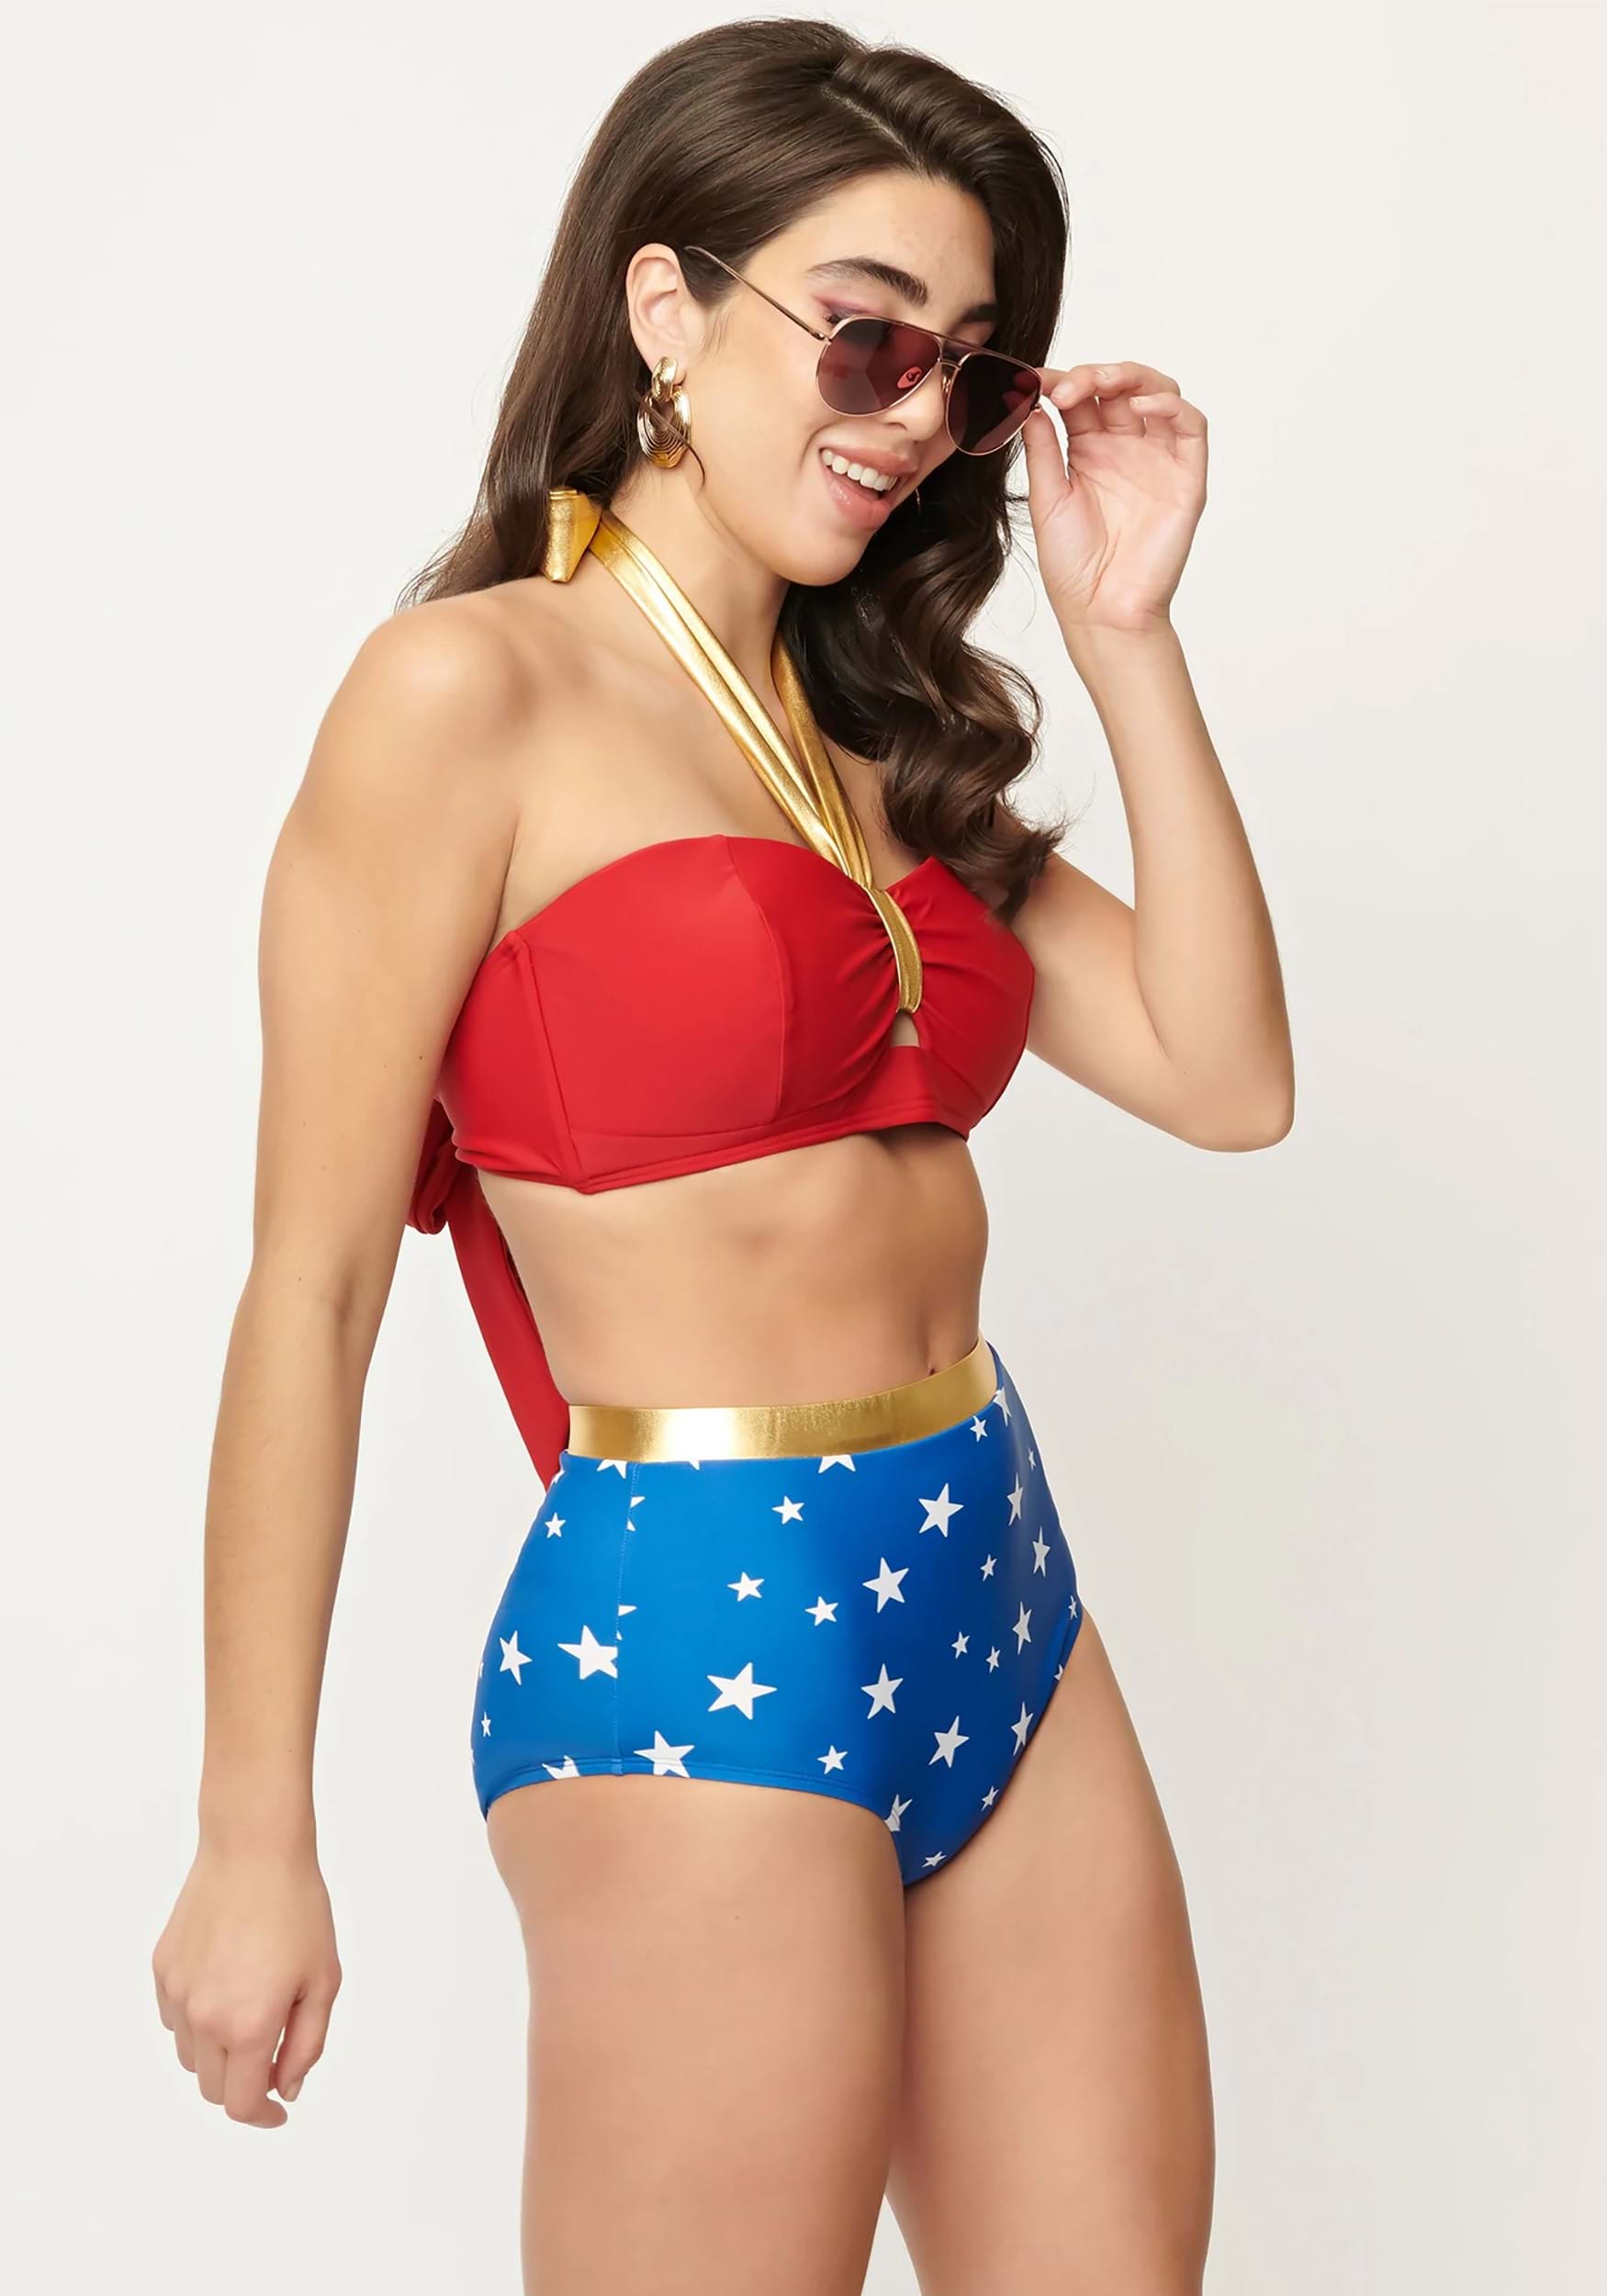 Beau Baby: Finished Project: Wonder Woman Swimsuit!